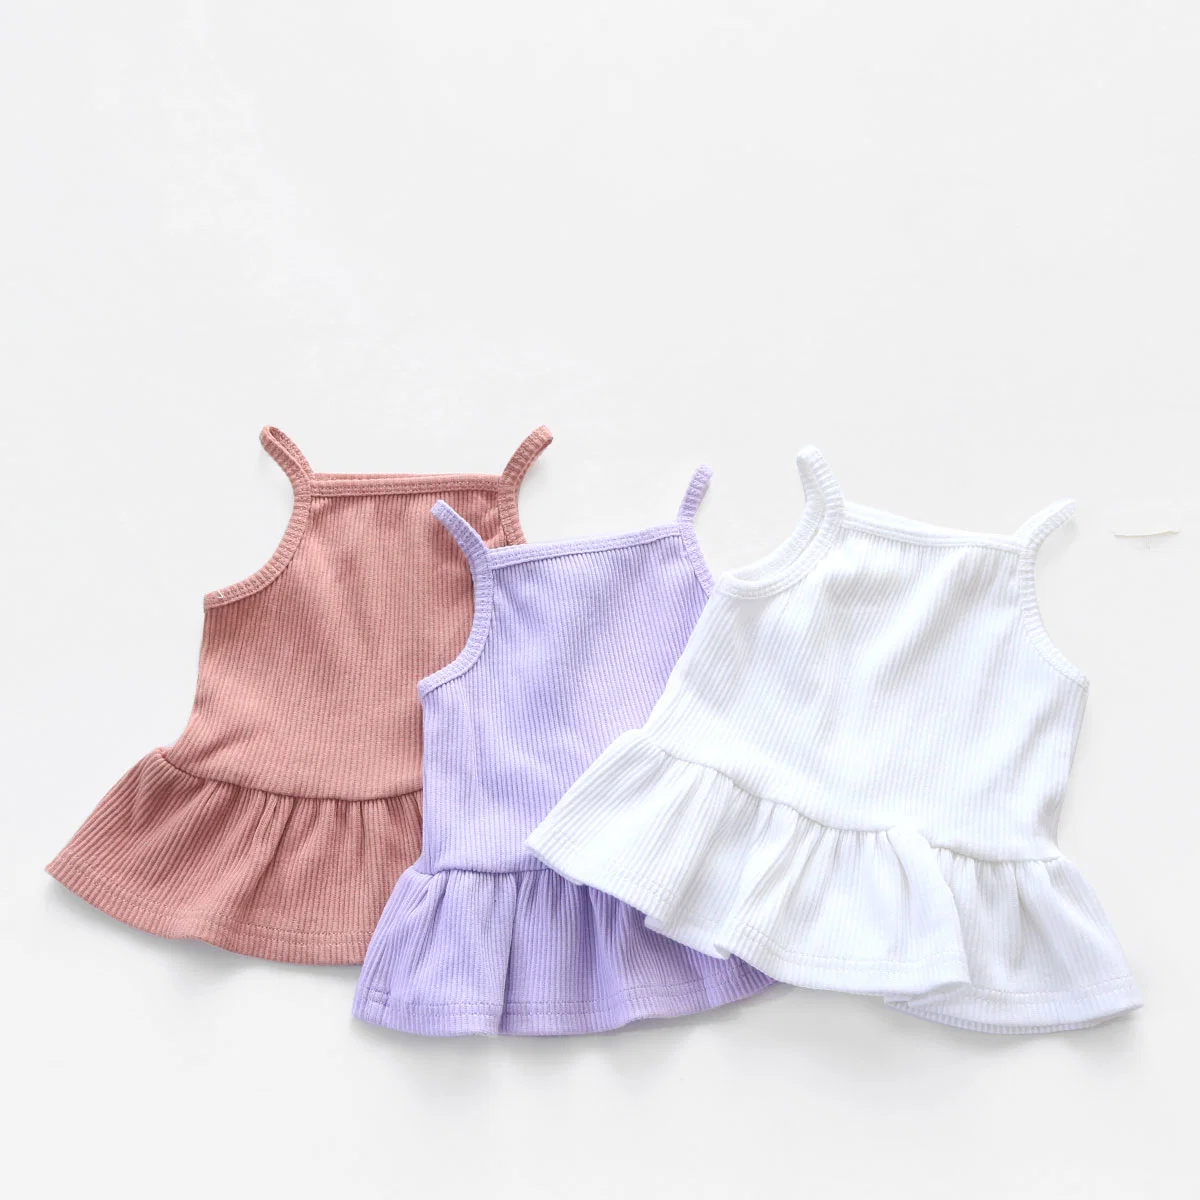 100% Cotton Ribbed Kids Camisole Top Baby Girls Top